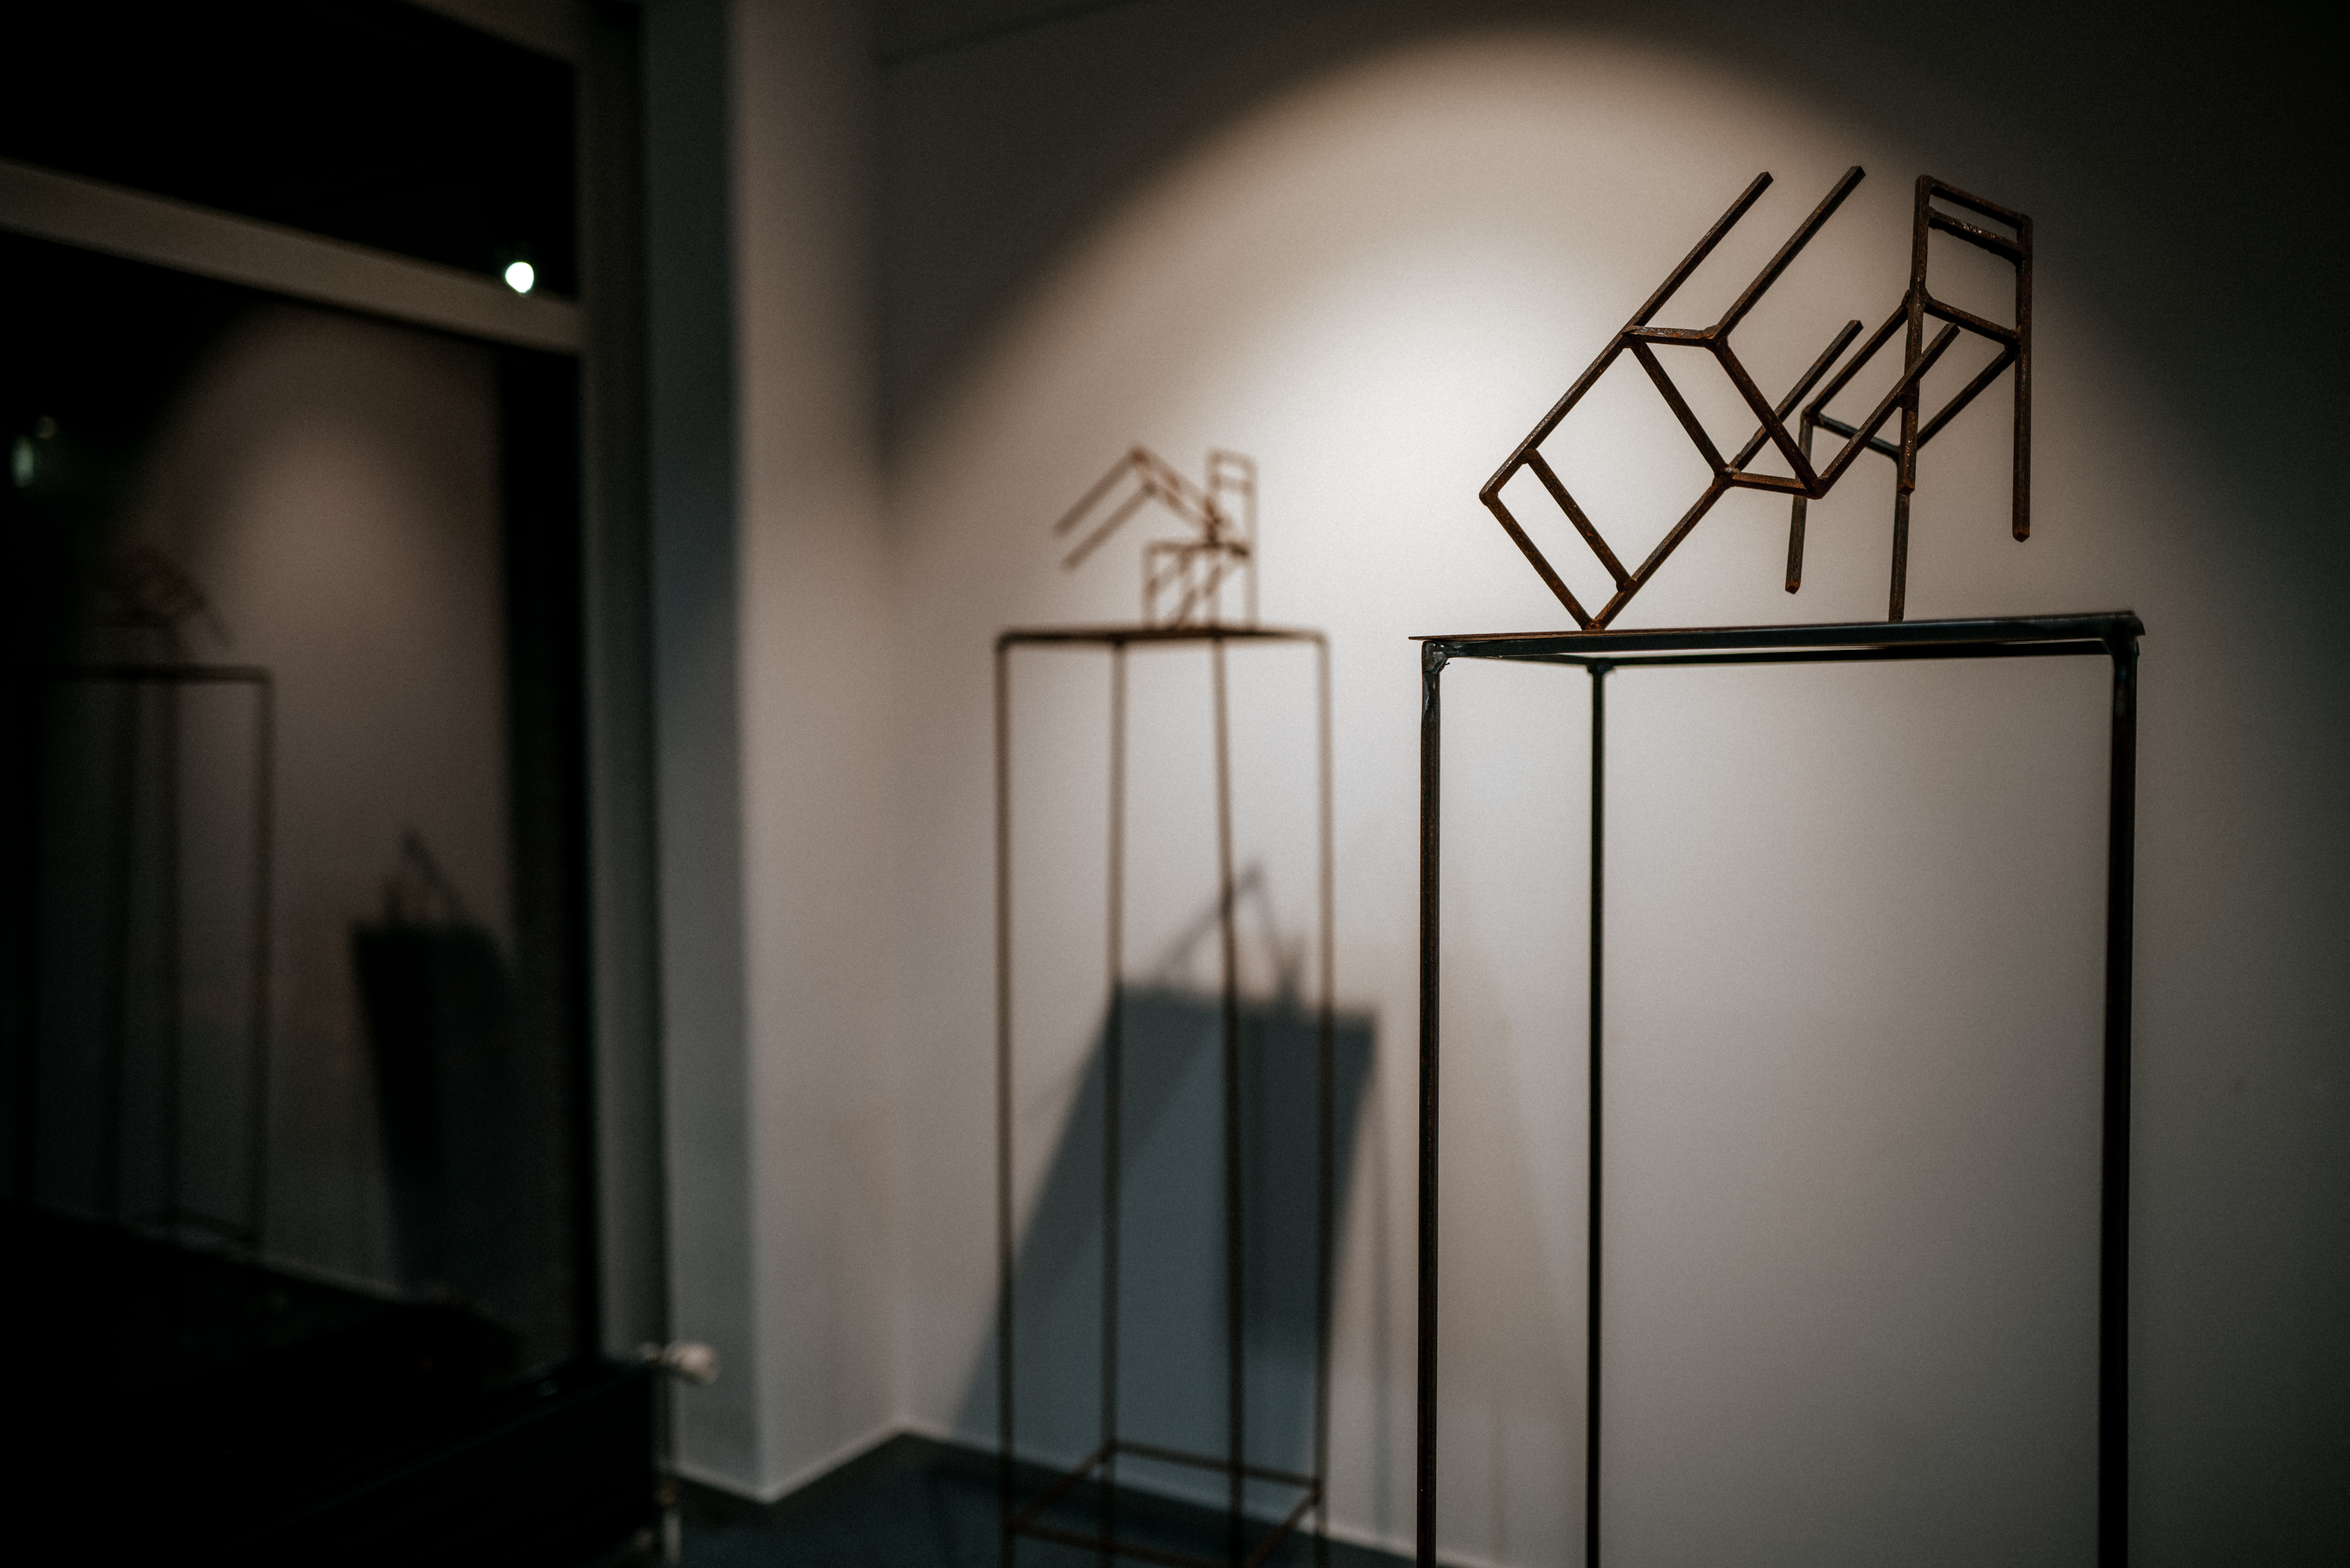 Sculpture of two linear metal chairs with its shadow on the wall